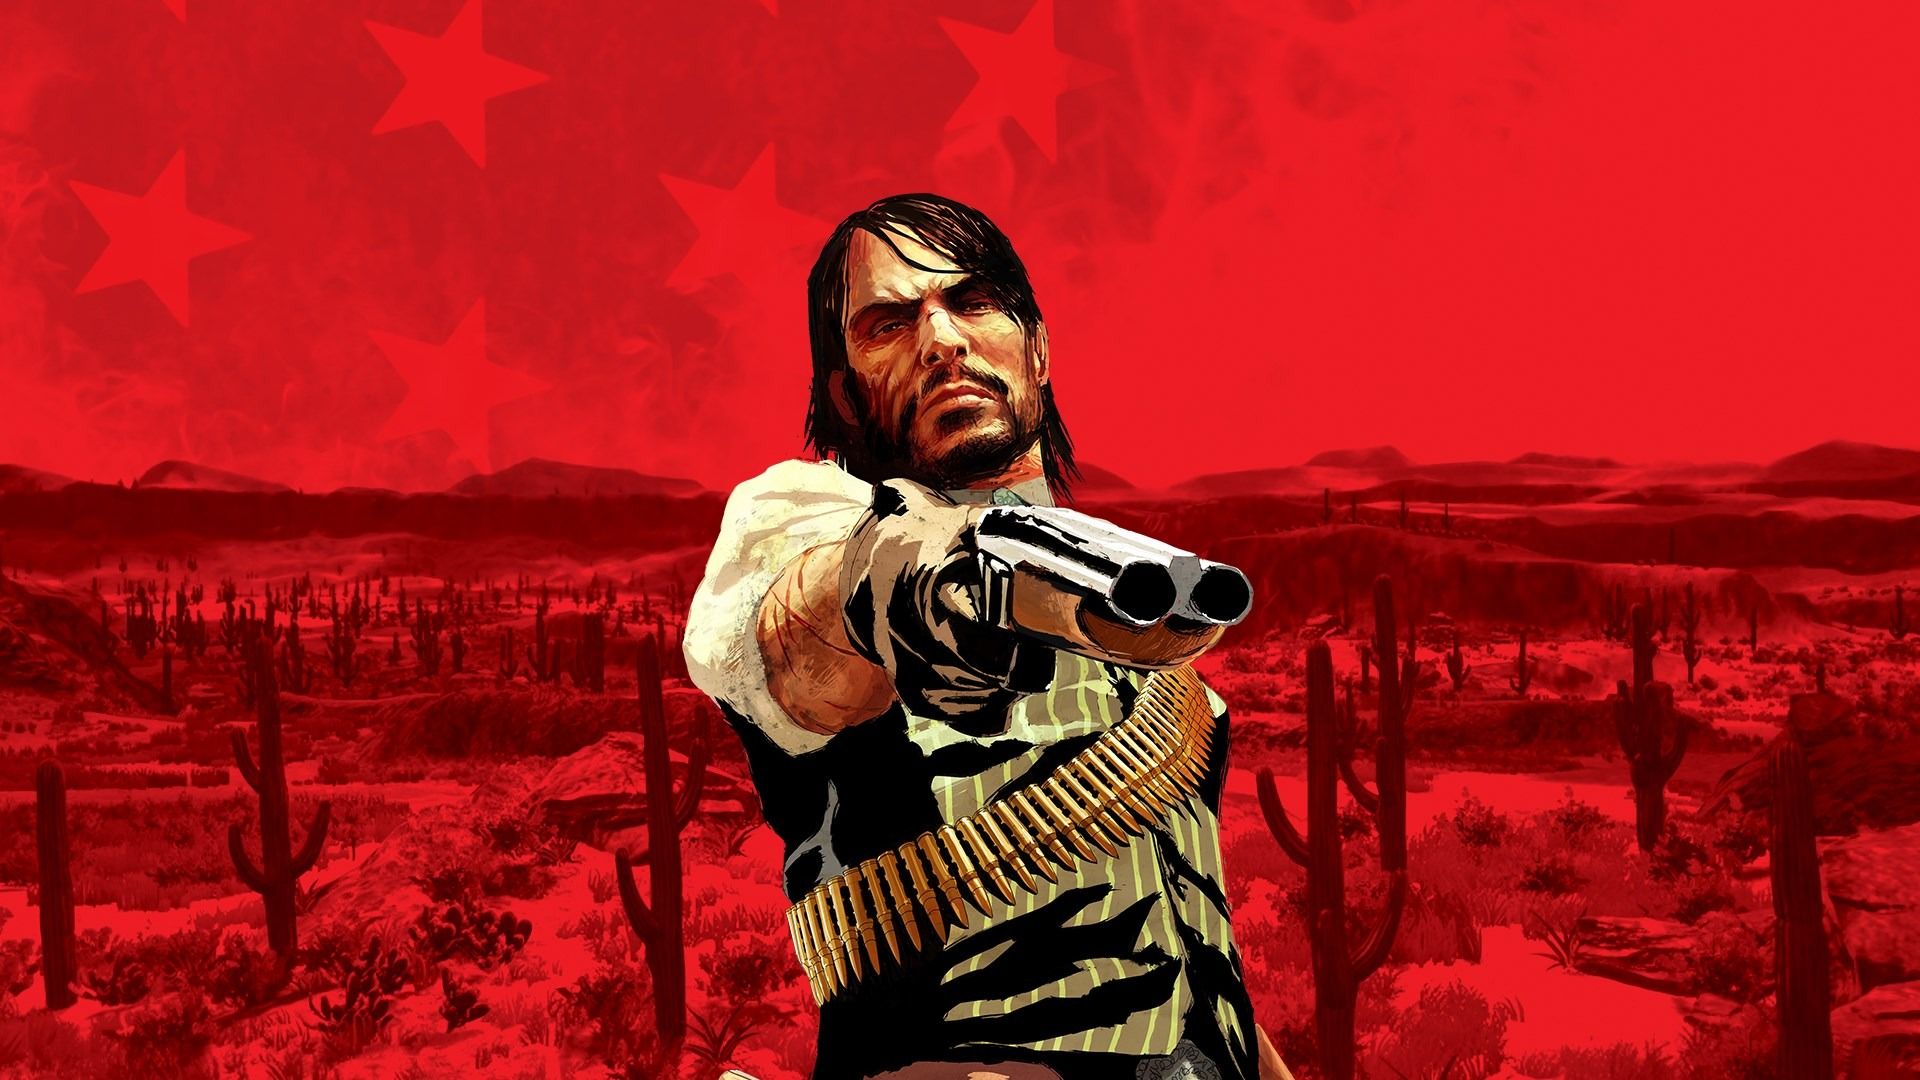 GTA/Red Dead Redemption